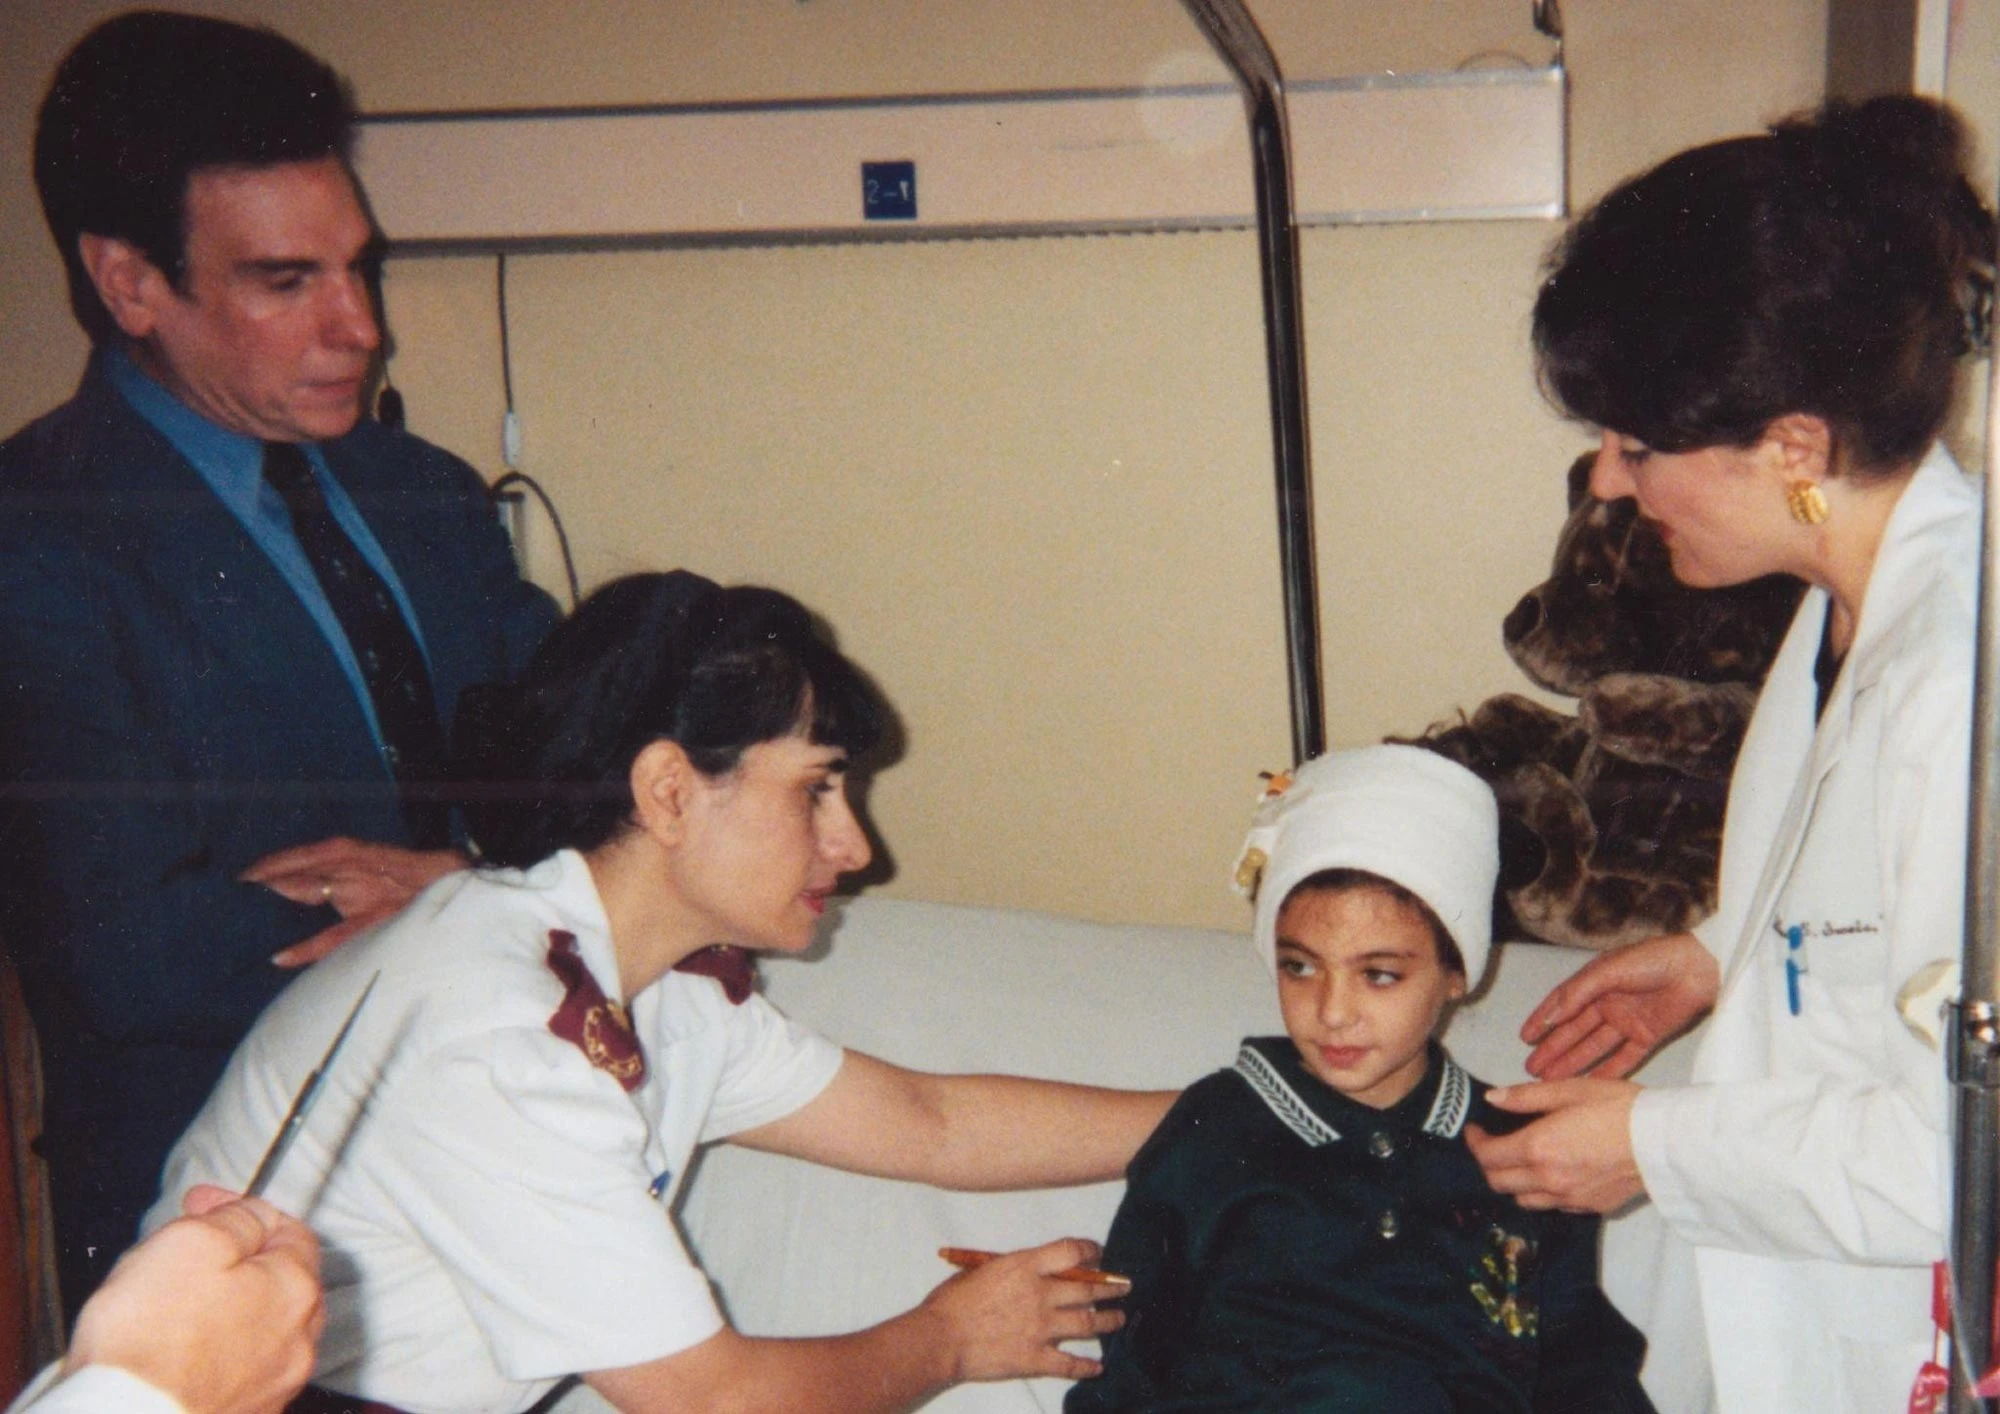 A child being attended to by doctors